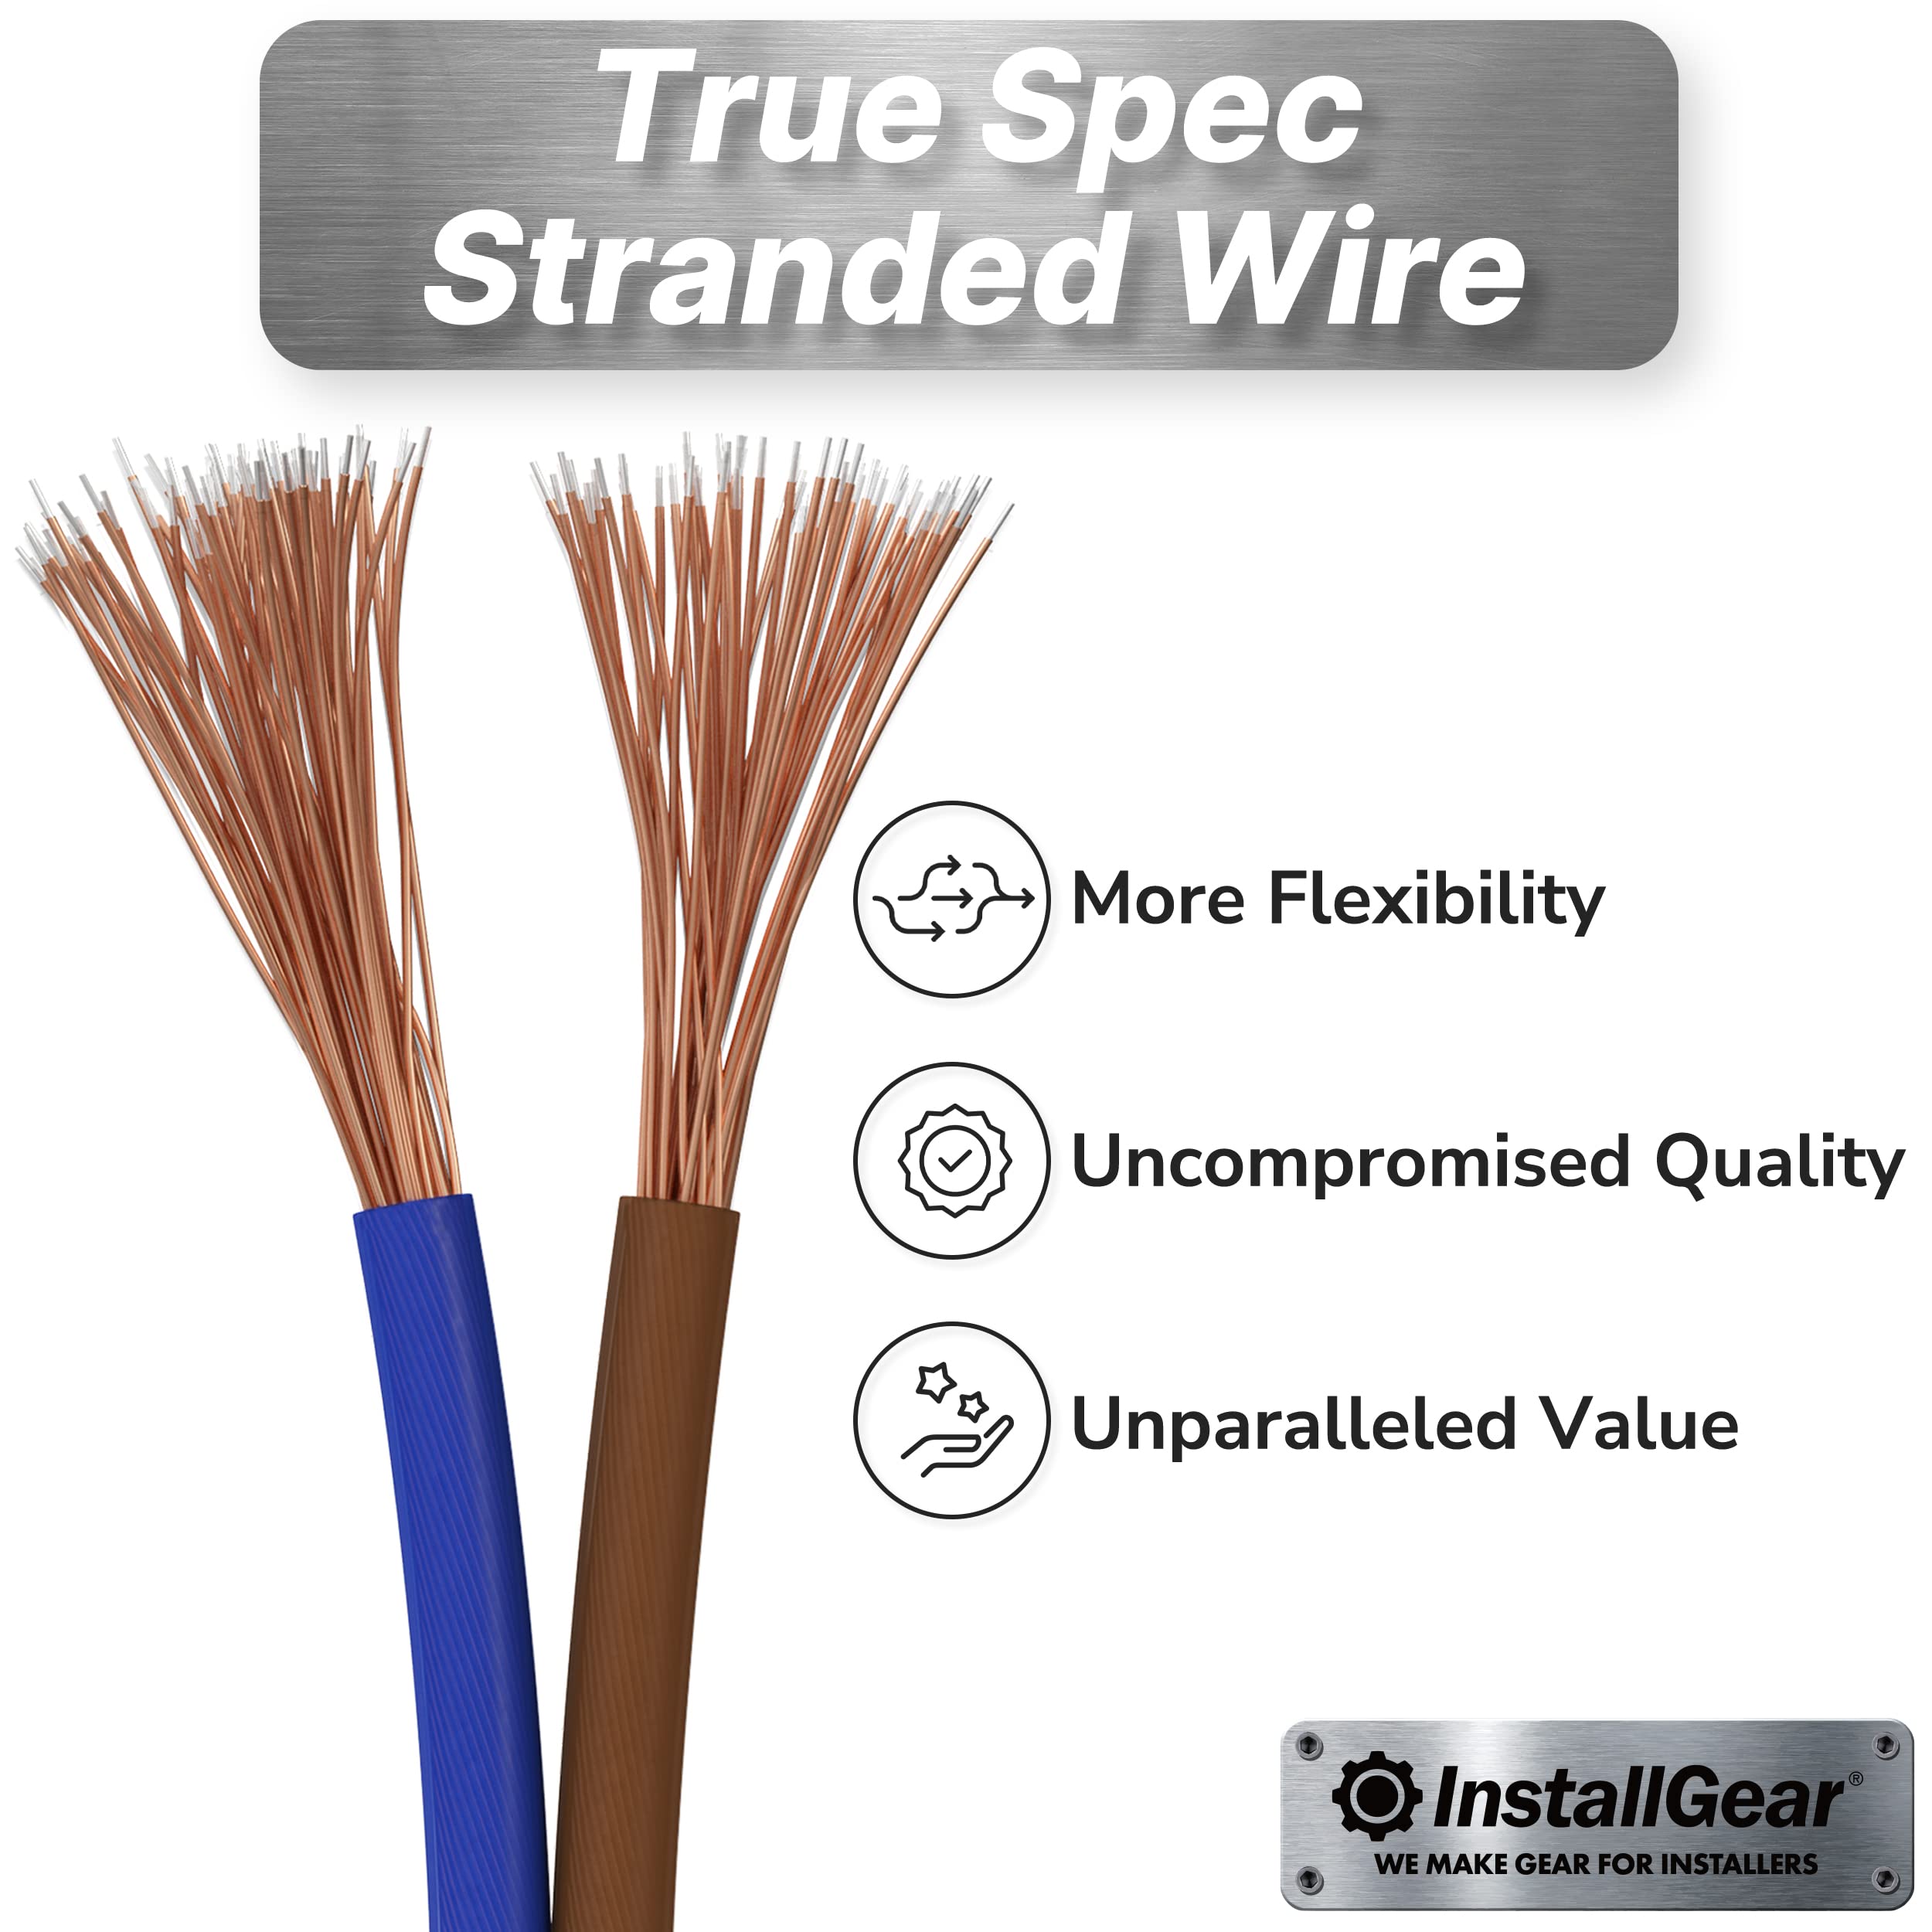 InstallGear 14 Gauge Speaker Wire Cable (500ft), 14 AWG Speaker Wire Cable, True Spec Soft Touch Cables | Great Use for Car Speakers Stereos, Home Theater Speakers, Surround Sound, Radio Wiring  - Like New